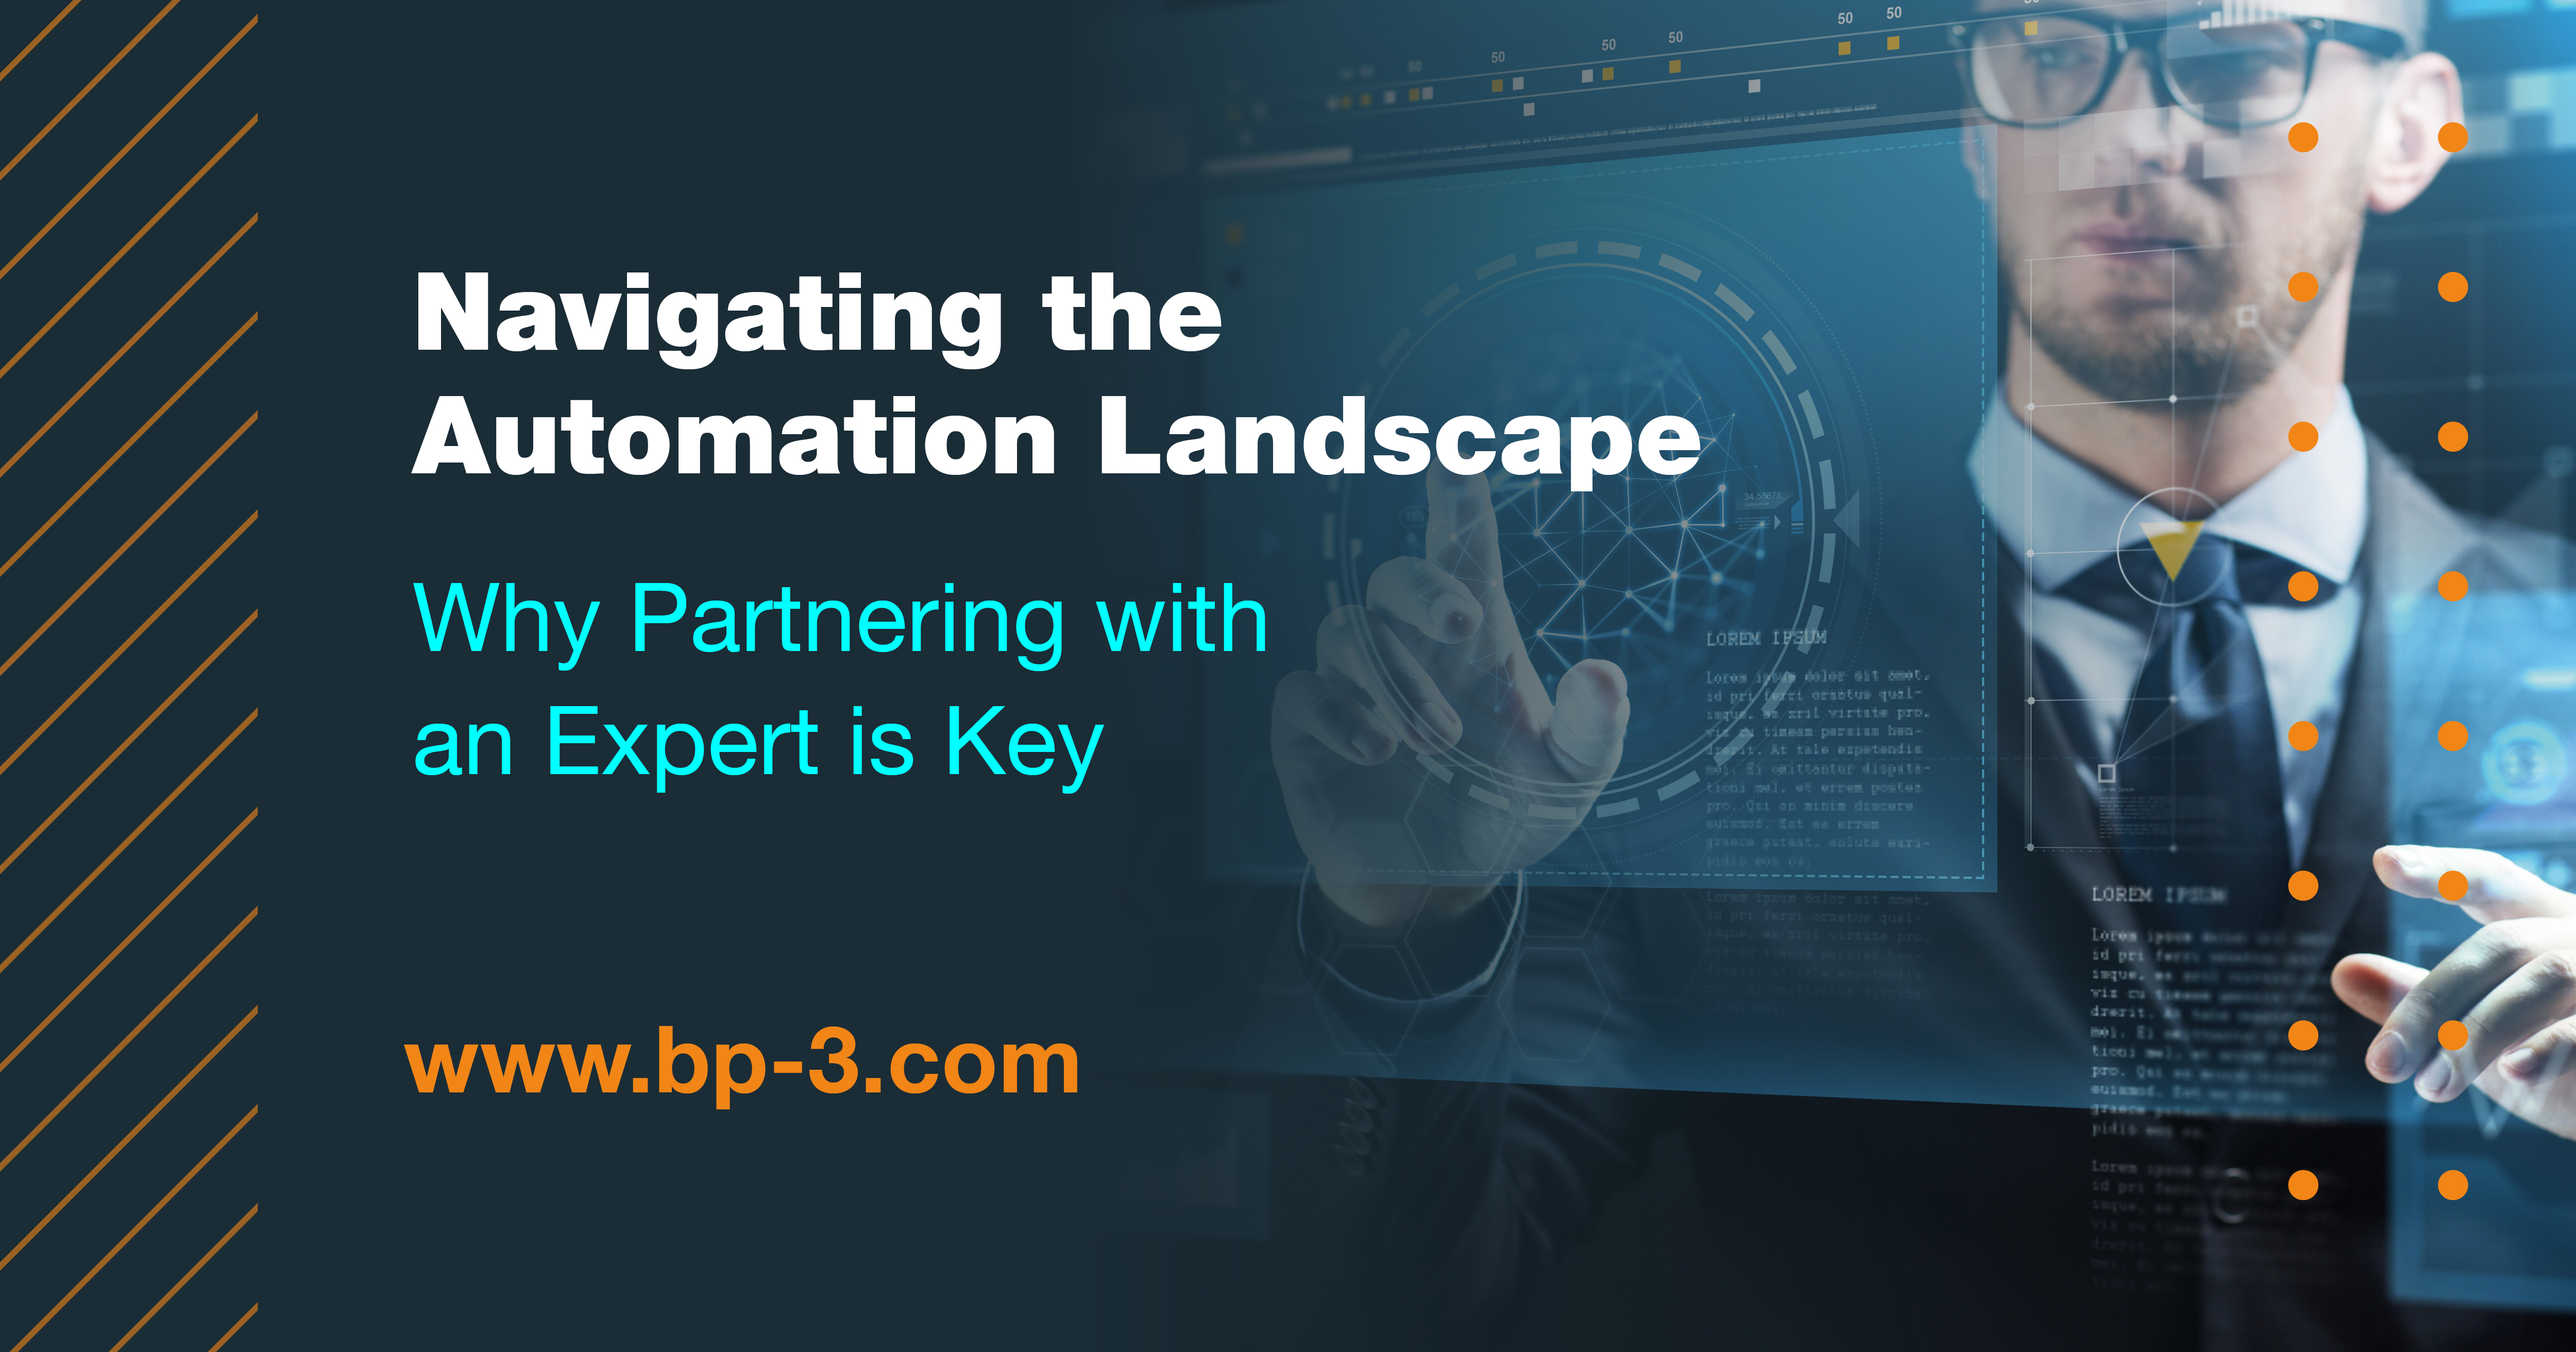 Navigating the Automation Landscape: Why Partnering with an Expert is Key